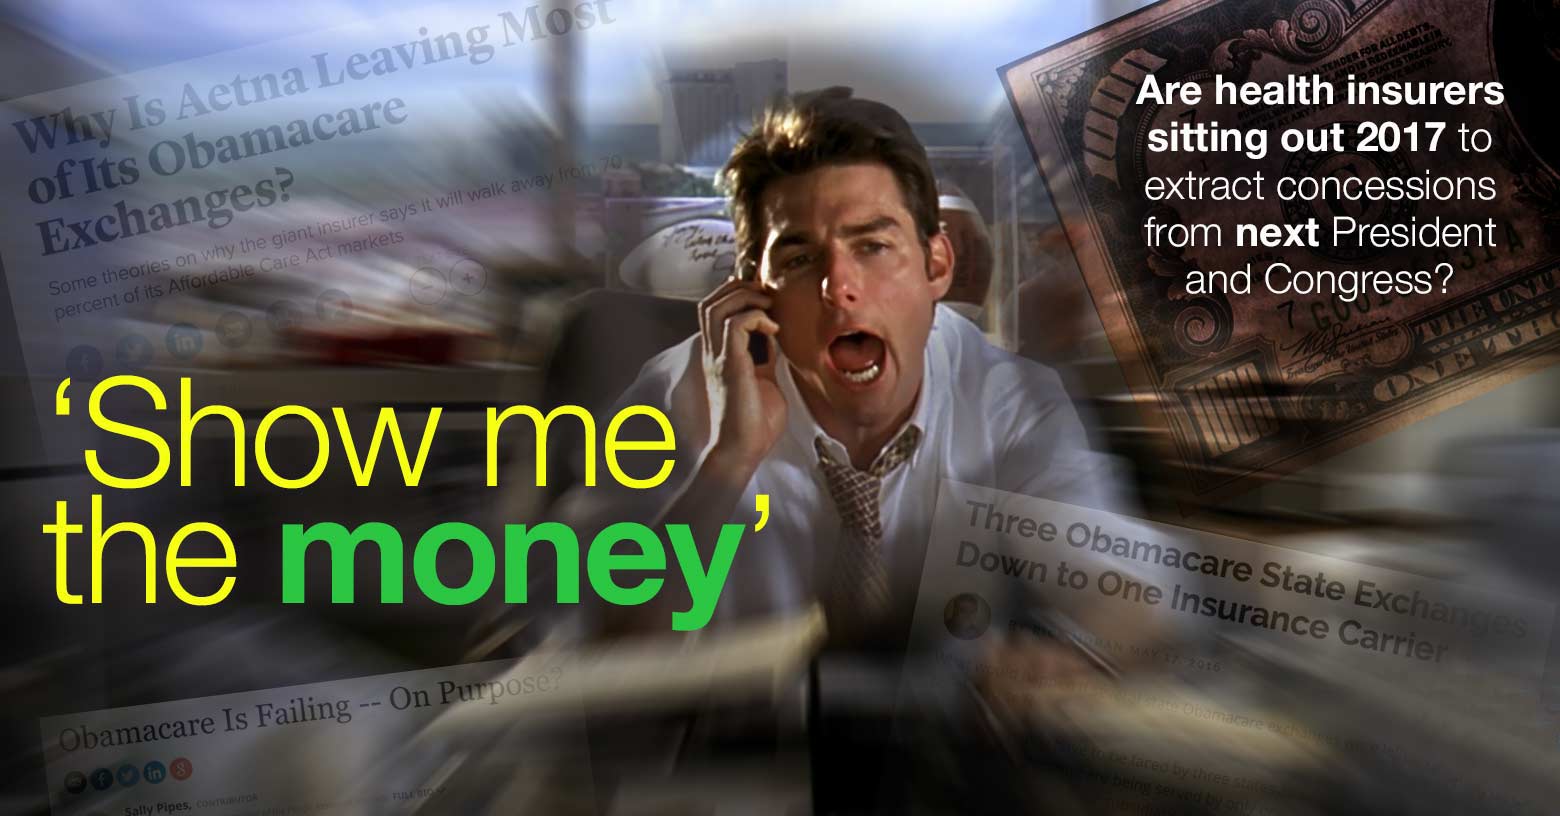 Jerry Maguire and health insurance greed.